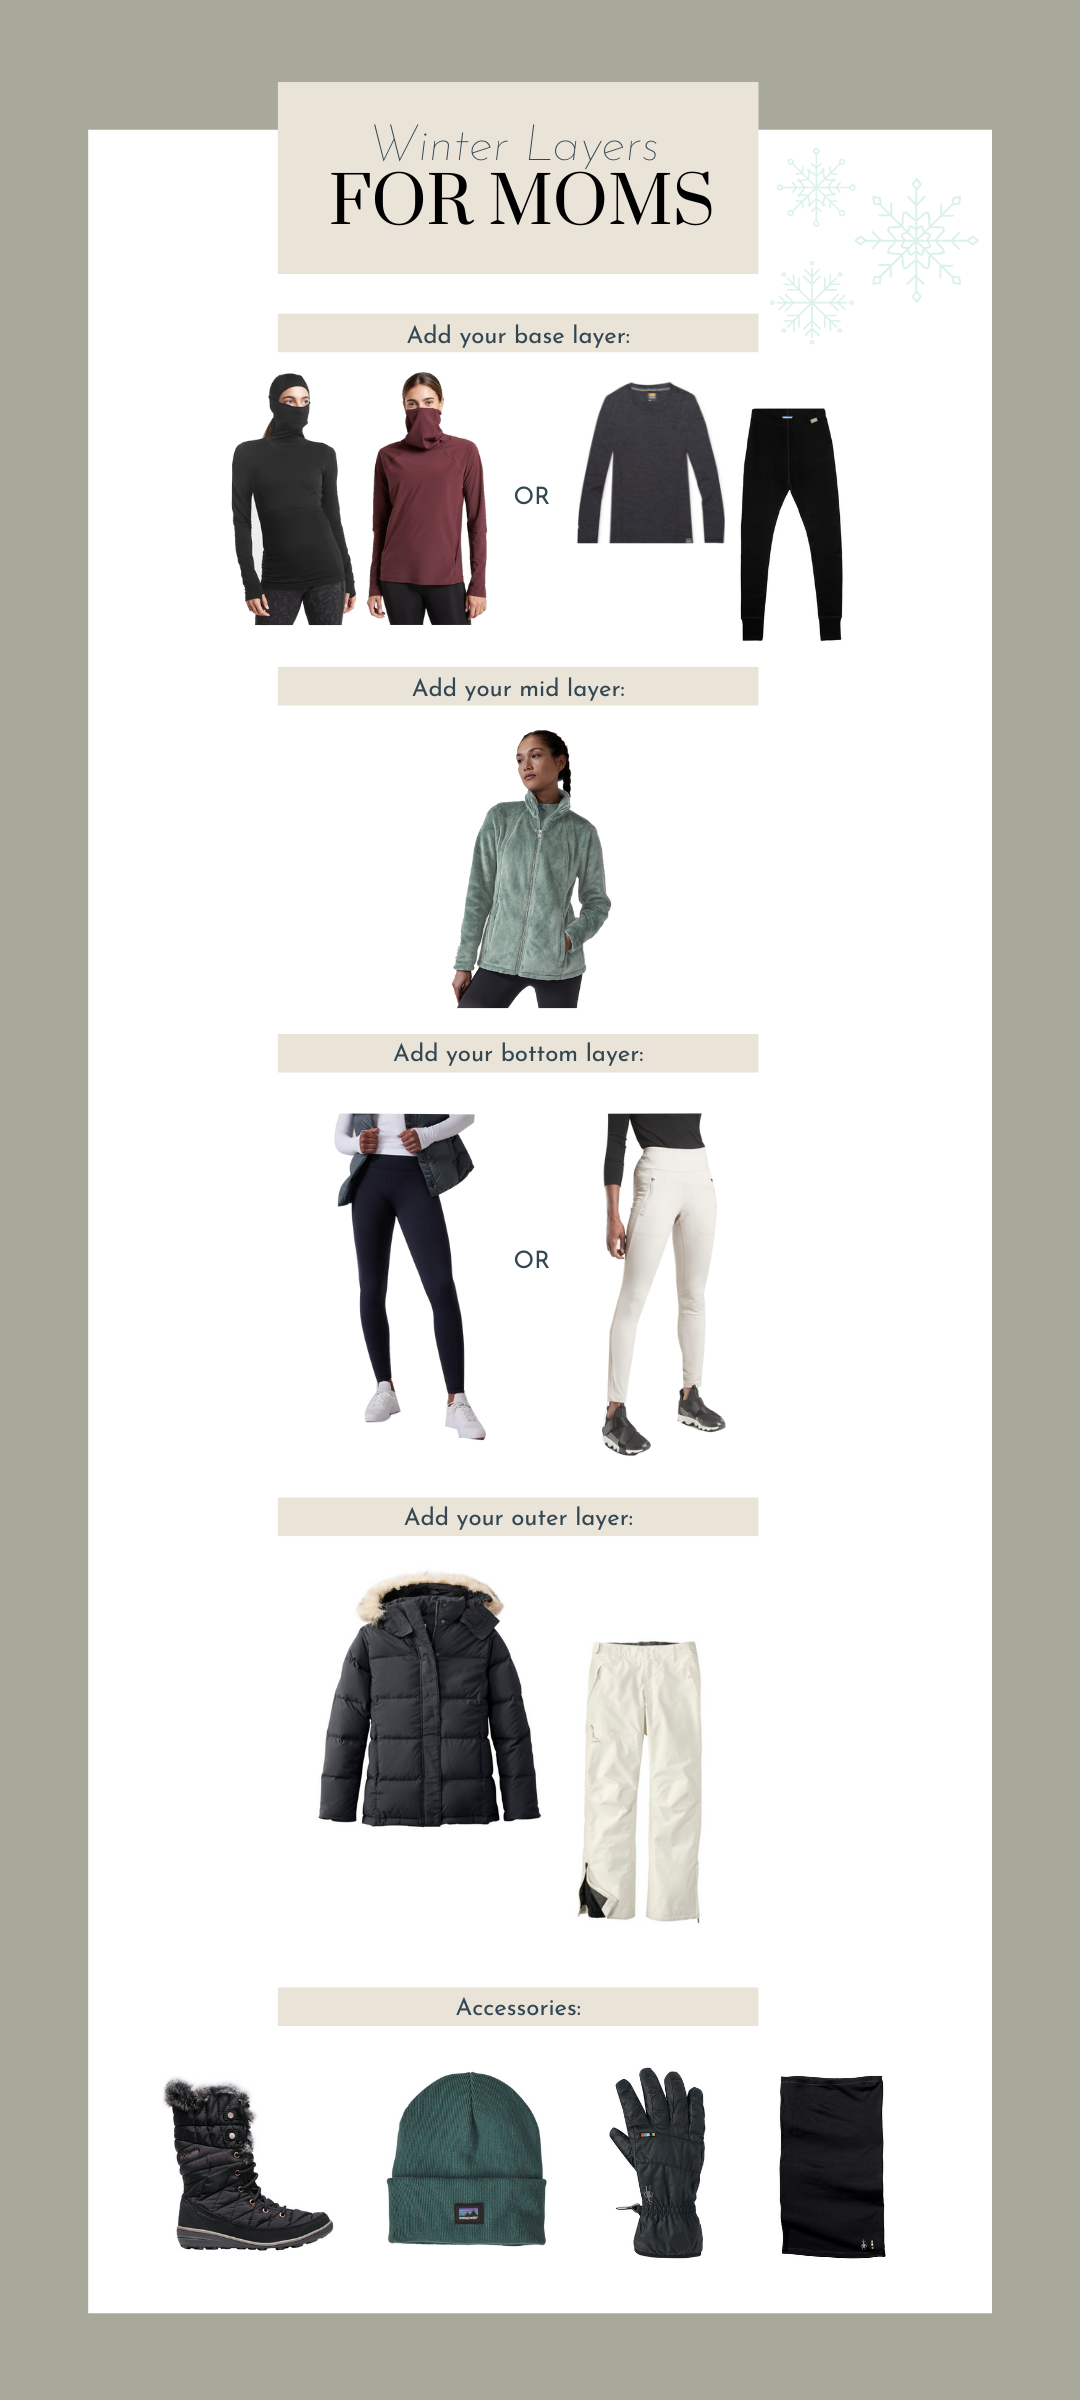 https://lynzyandco.com/wp-content/uploads/2021/11/Winter-Layers-2.png